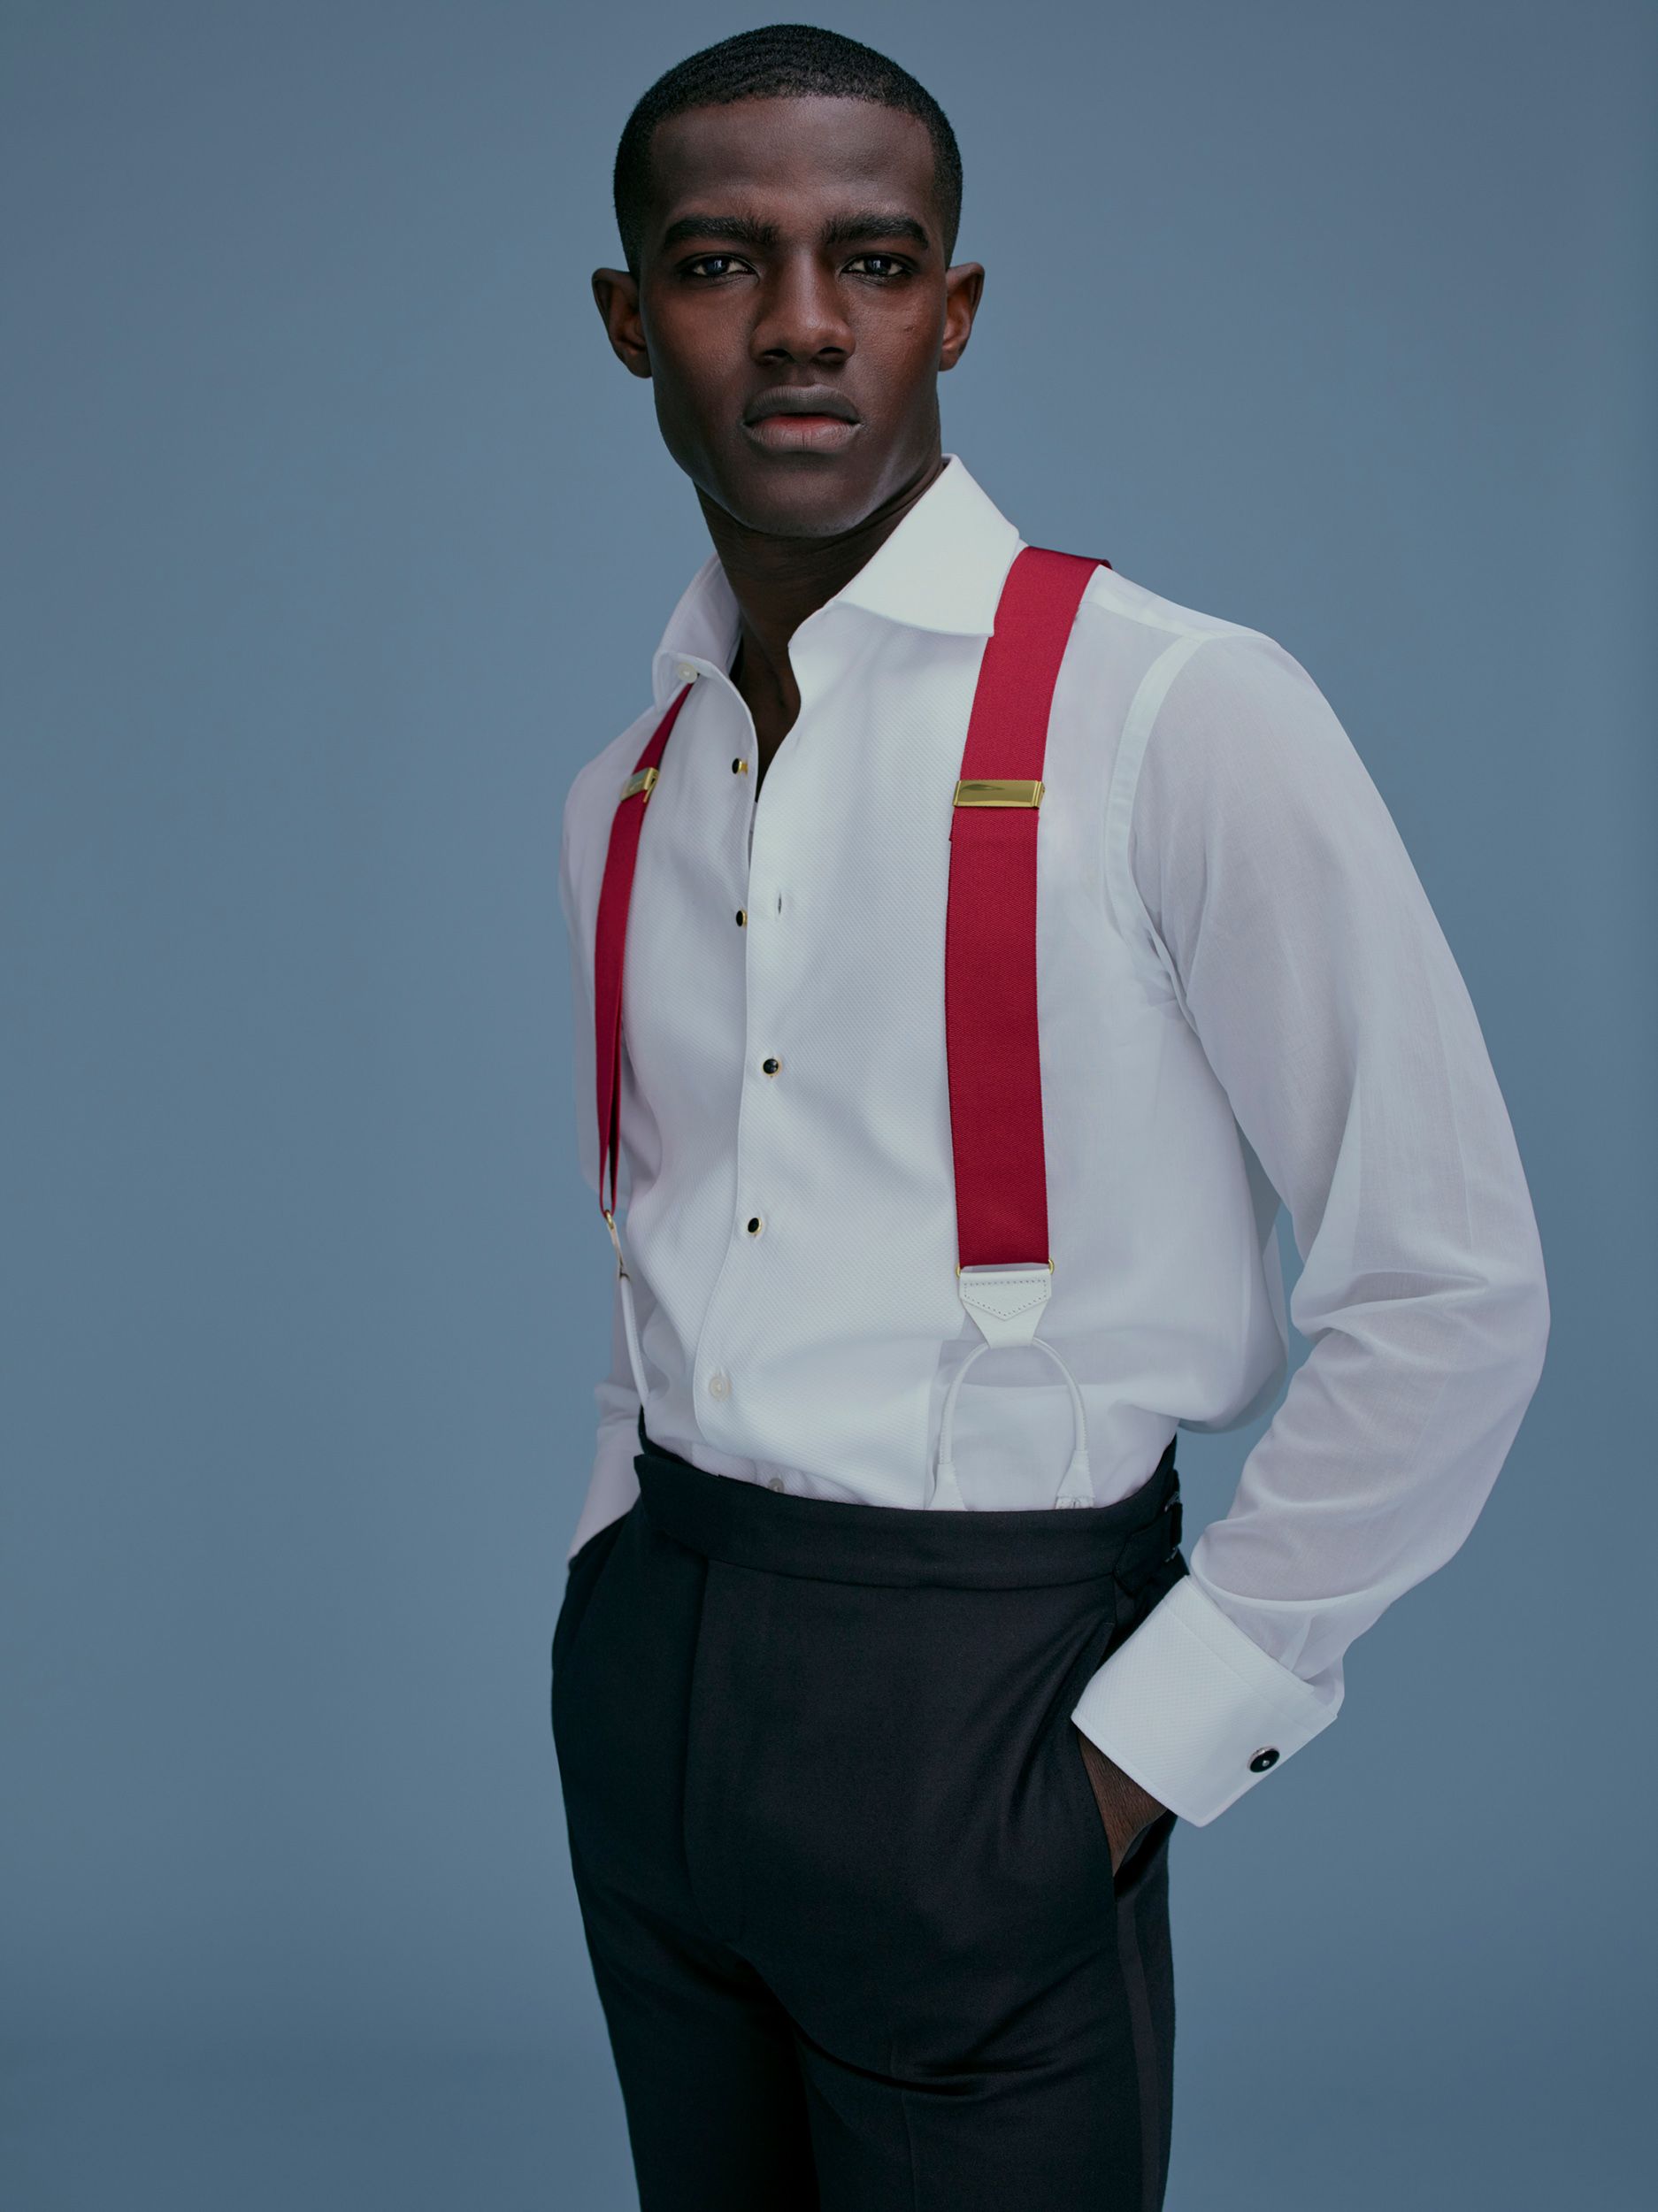 Thomas Pink is adopting a new name and identity – Pink Shirtmaker London